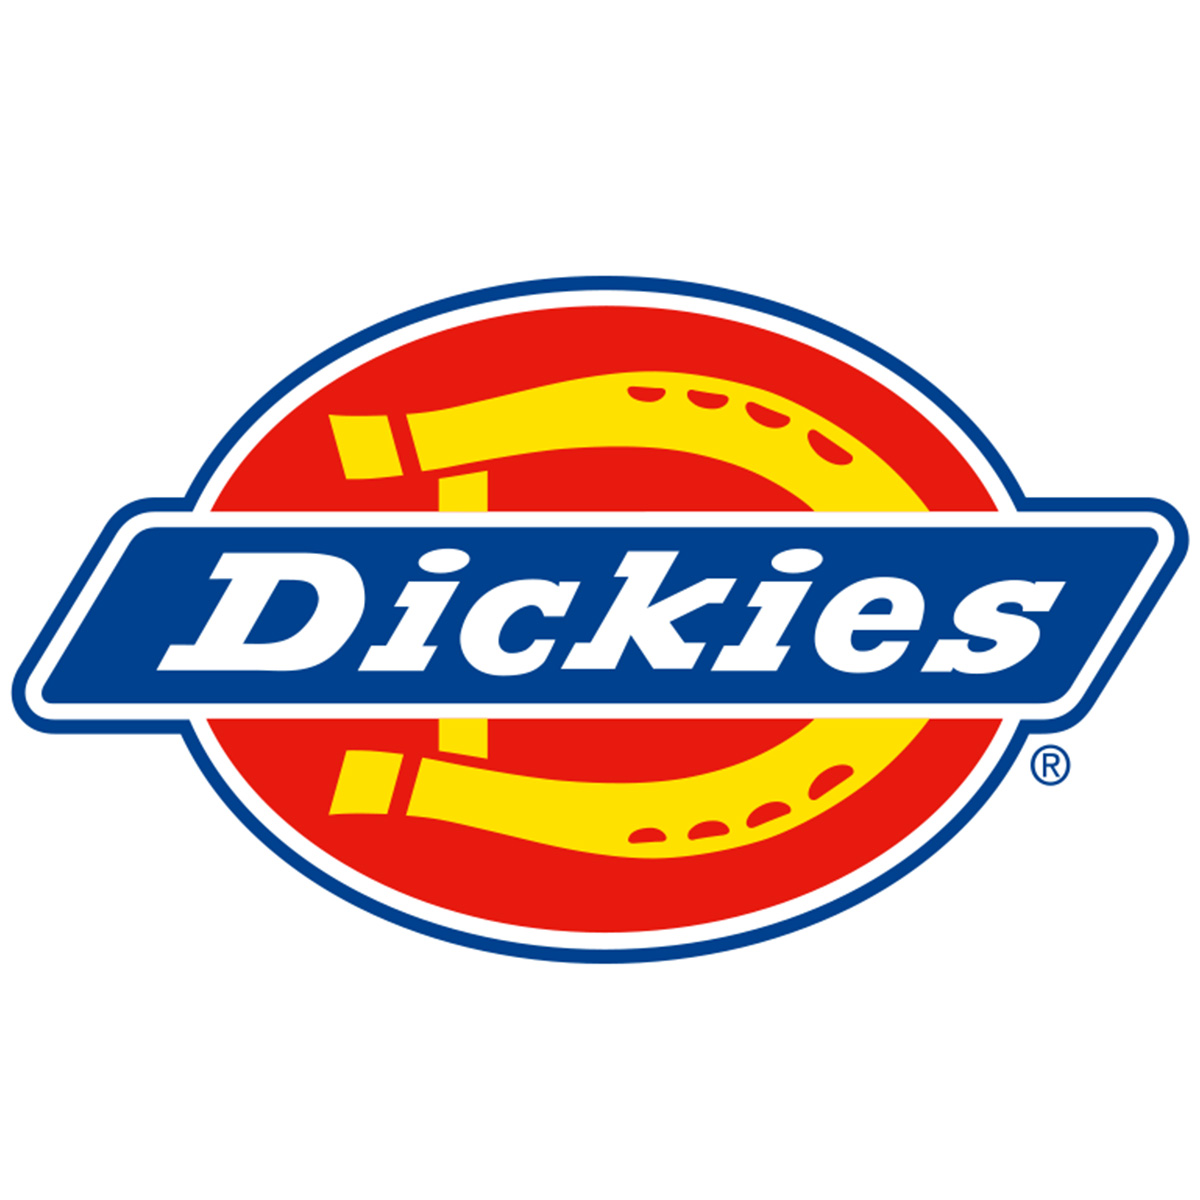 Dickies | MFC STORE OFFICIAL ONLINESTORE